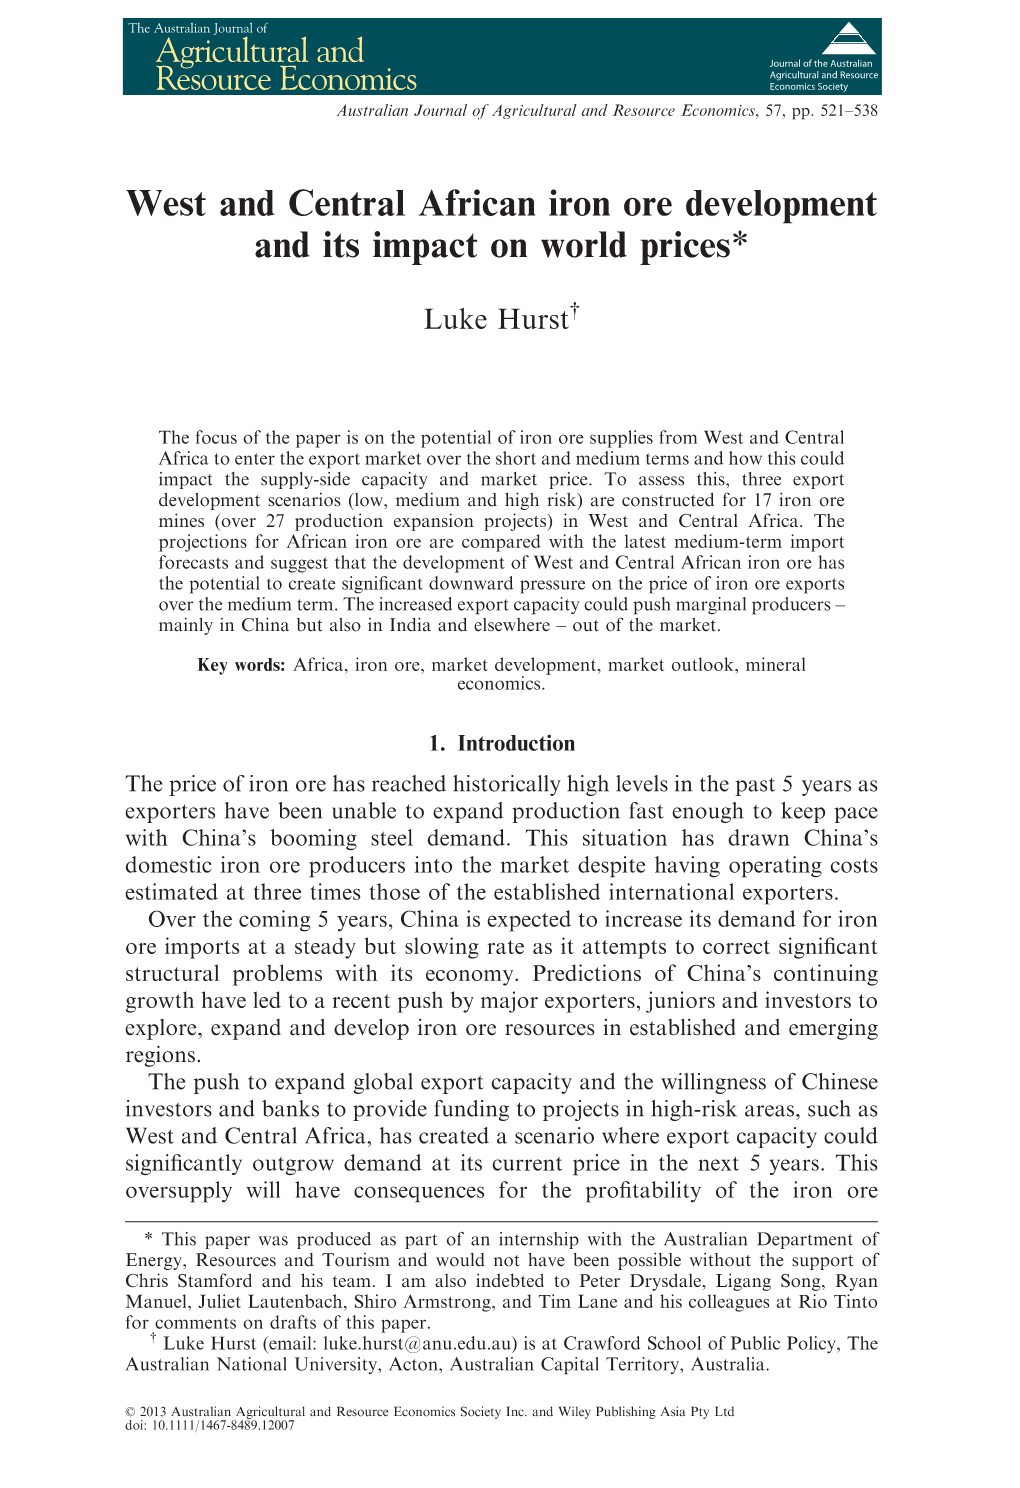 West and Central African Iron Ore Development and Its Impact on World Prices*